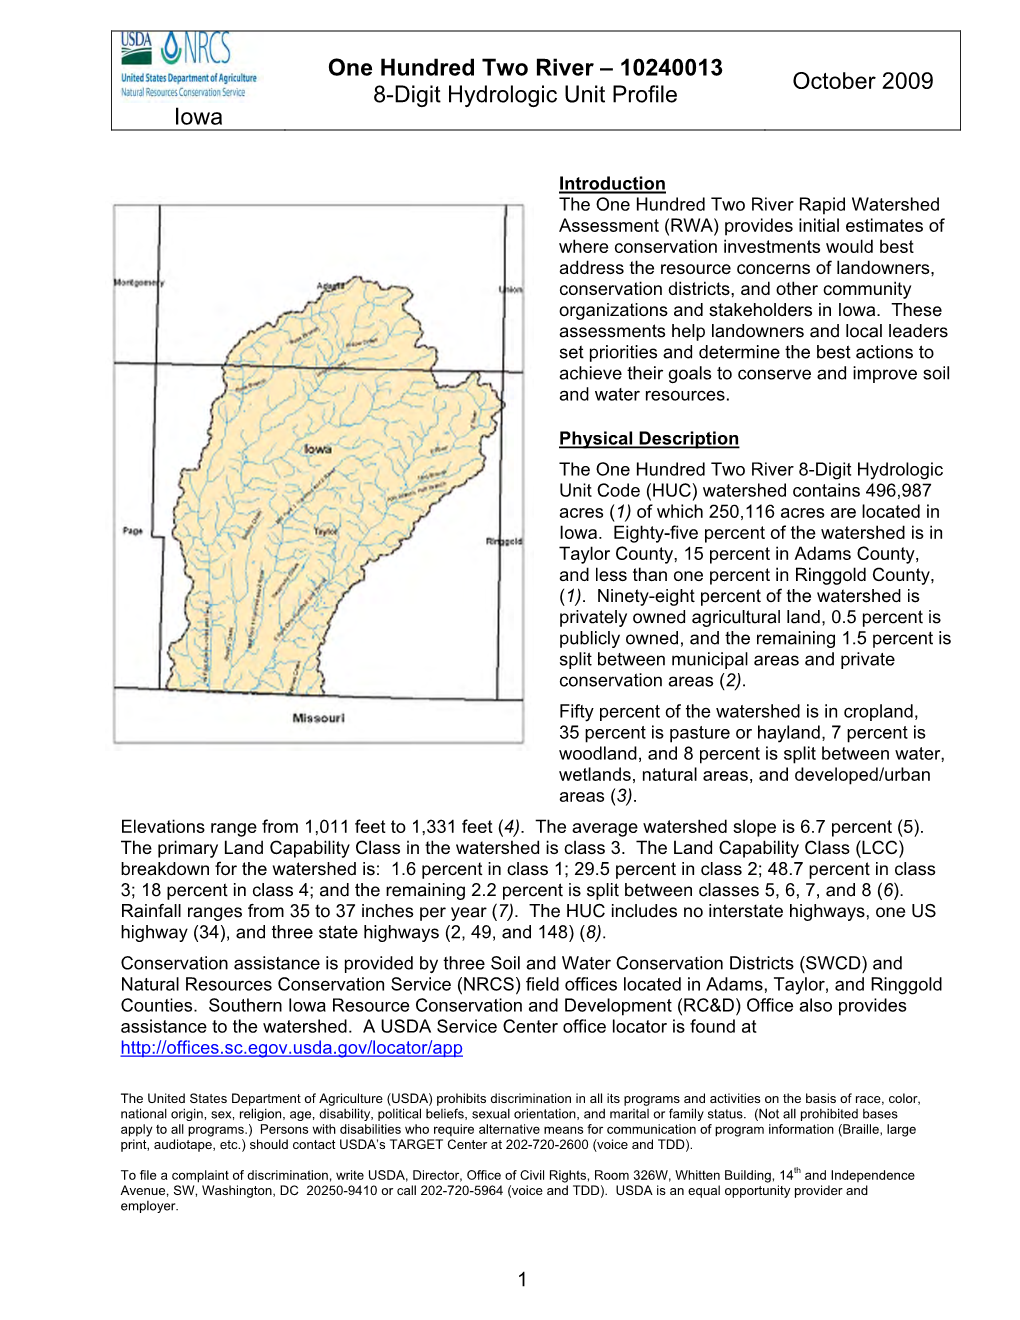 Iowa One Hundred Two River – 10240013 8-Digit Hydrologic Unit Profile October 2009